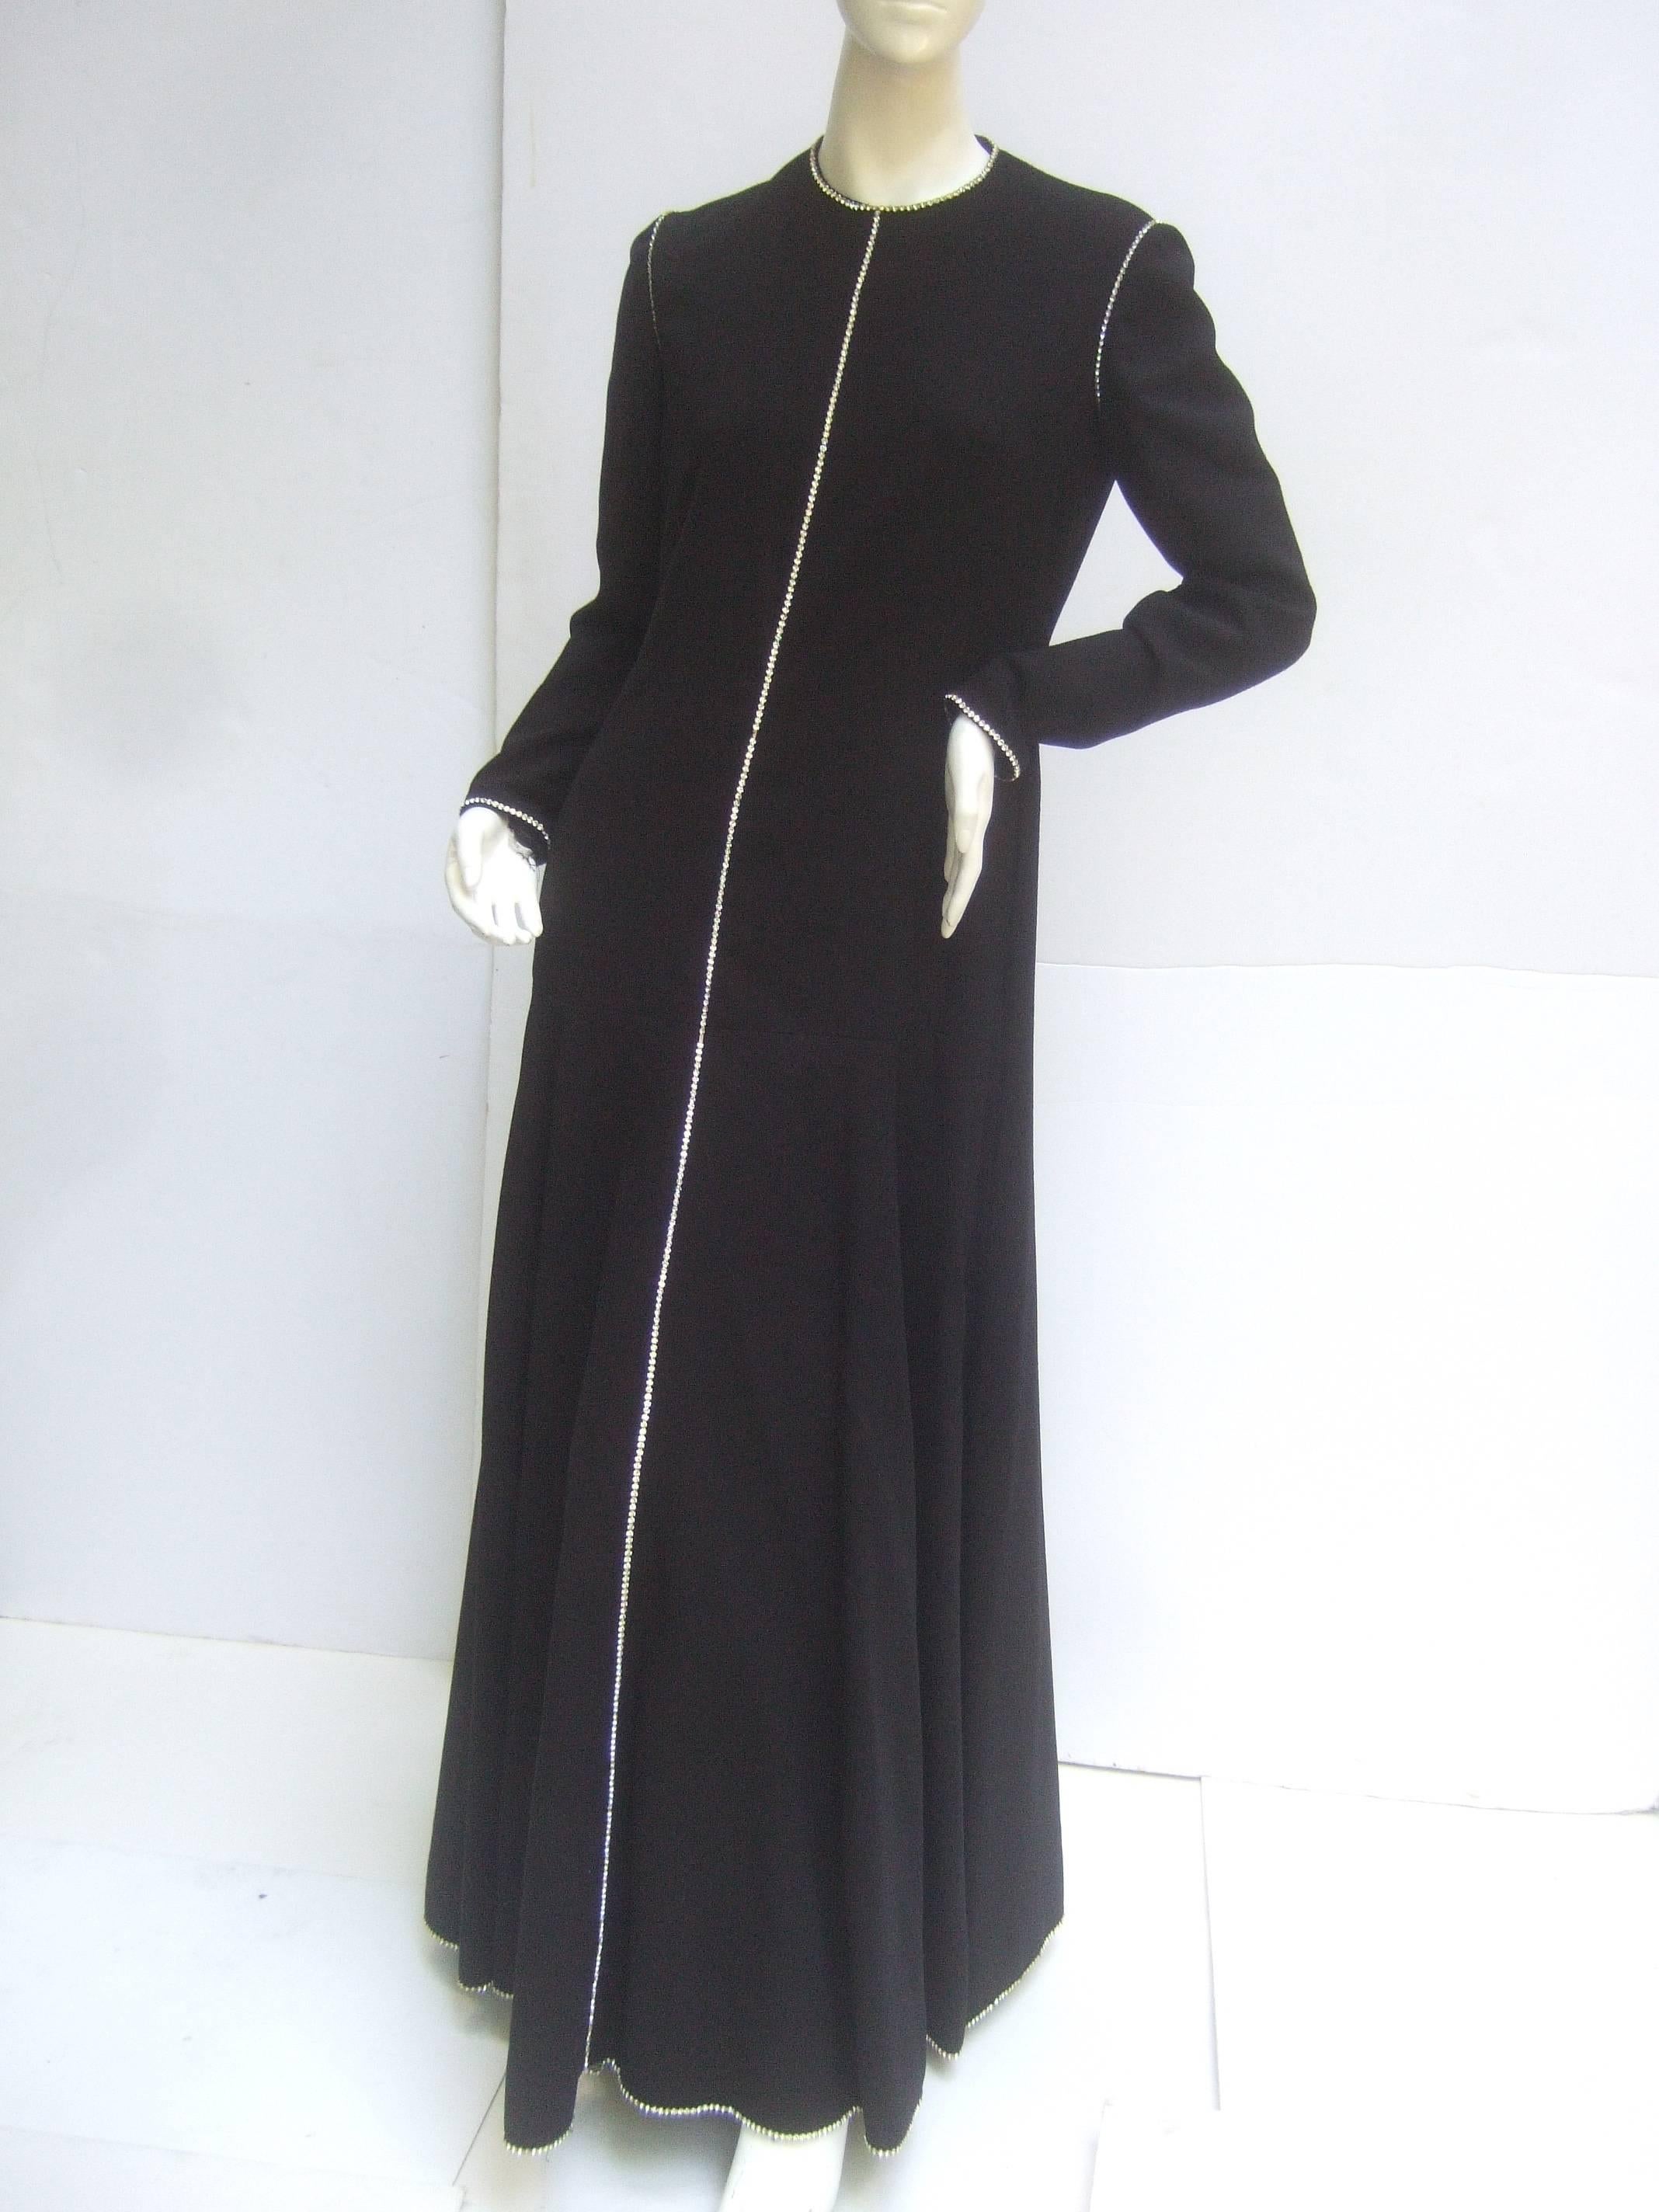 Geoffrey Beene Stunning black wool crystal trim gown c 1970
The elegant sweeping black wool gown is embellished
with a diamante crystal border that circles the neckline, 
runs down the center, frames the sleeve cuffs, extends 
to the shoulders